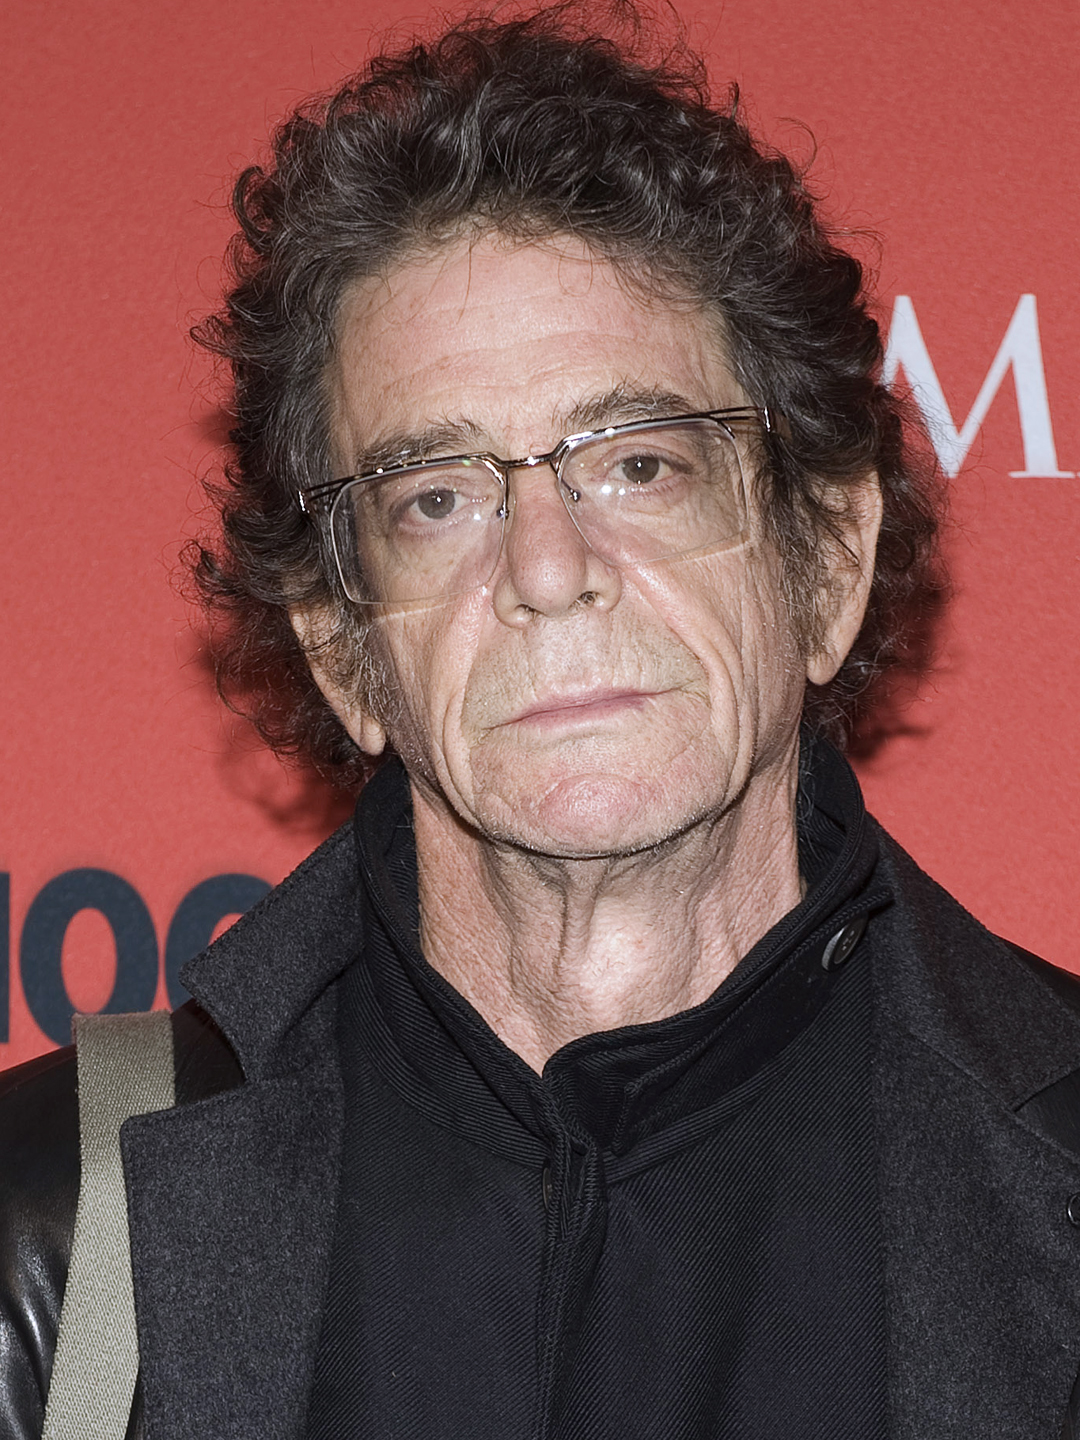 Image result for lou reed